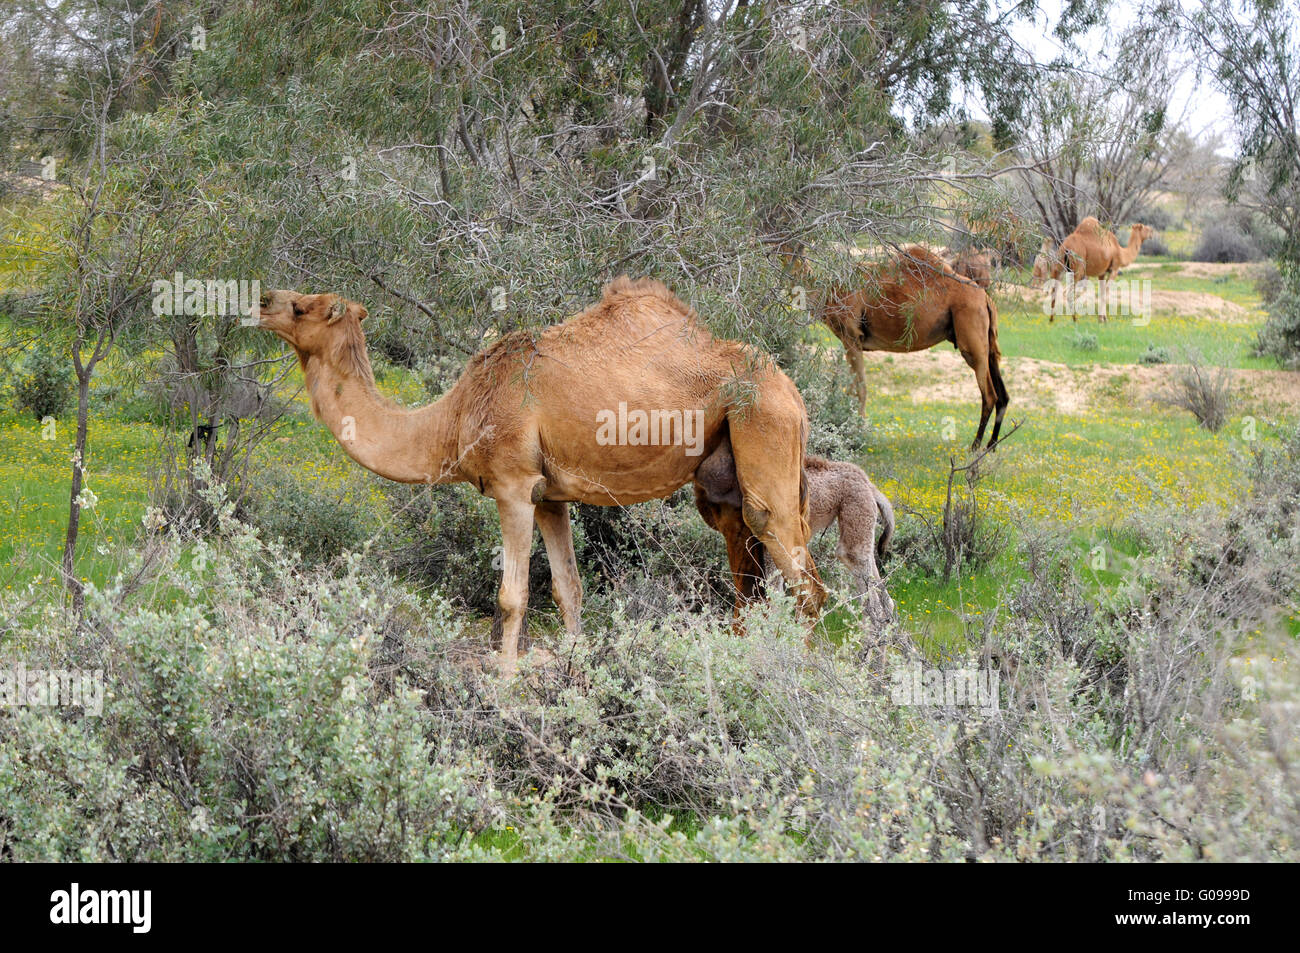 Camels grazing on branches Stock Photo